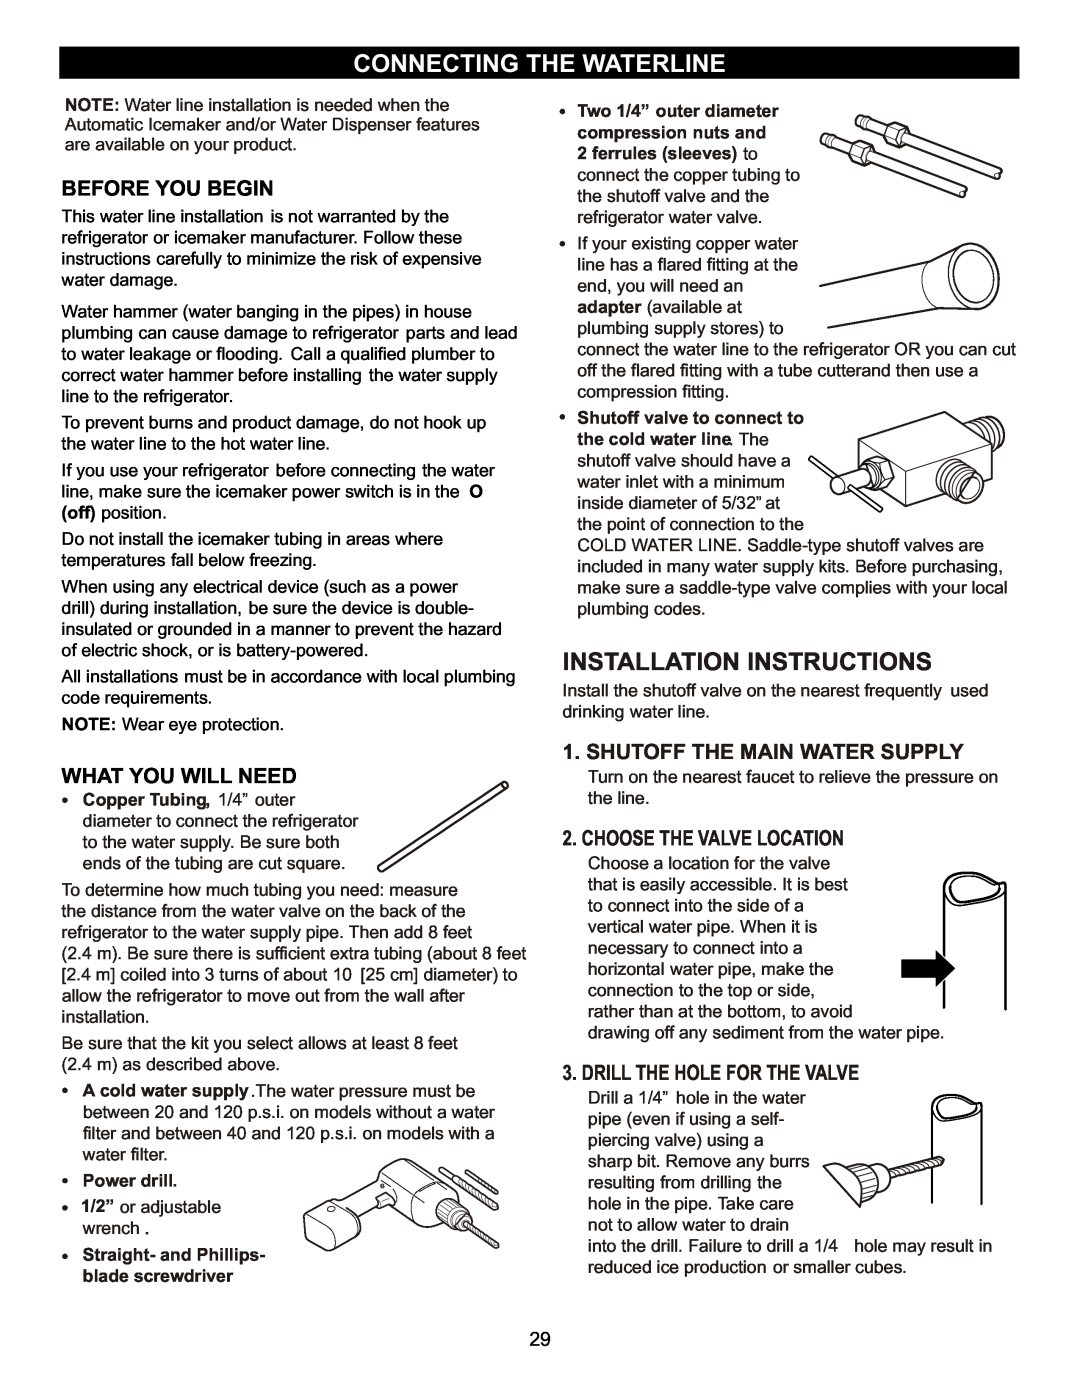 LG Electronics LFX23961SB Connecting The Waterline, Installation Instructions, Before You Begin, What You Will Need 